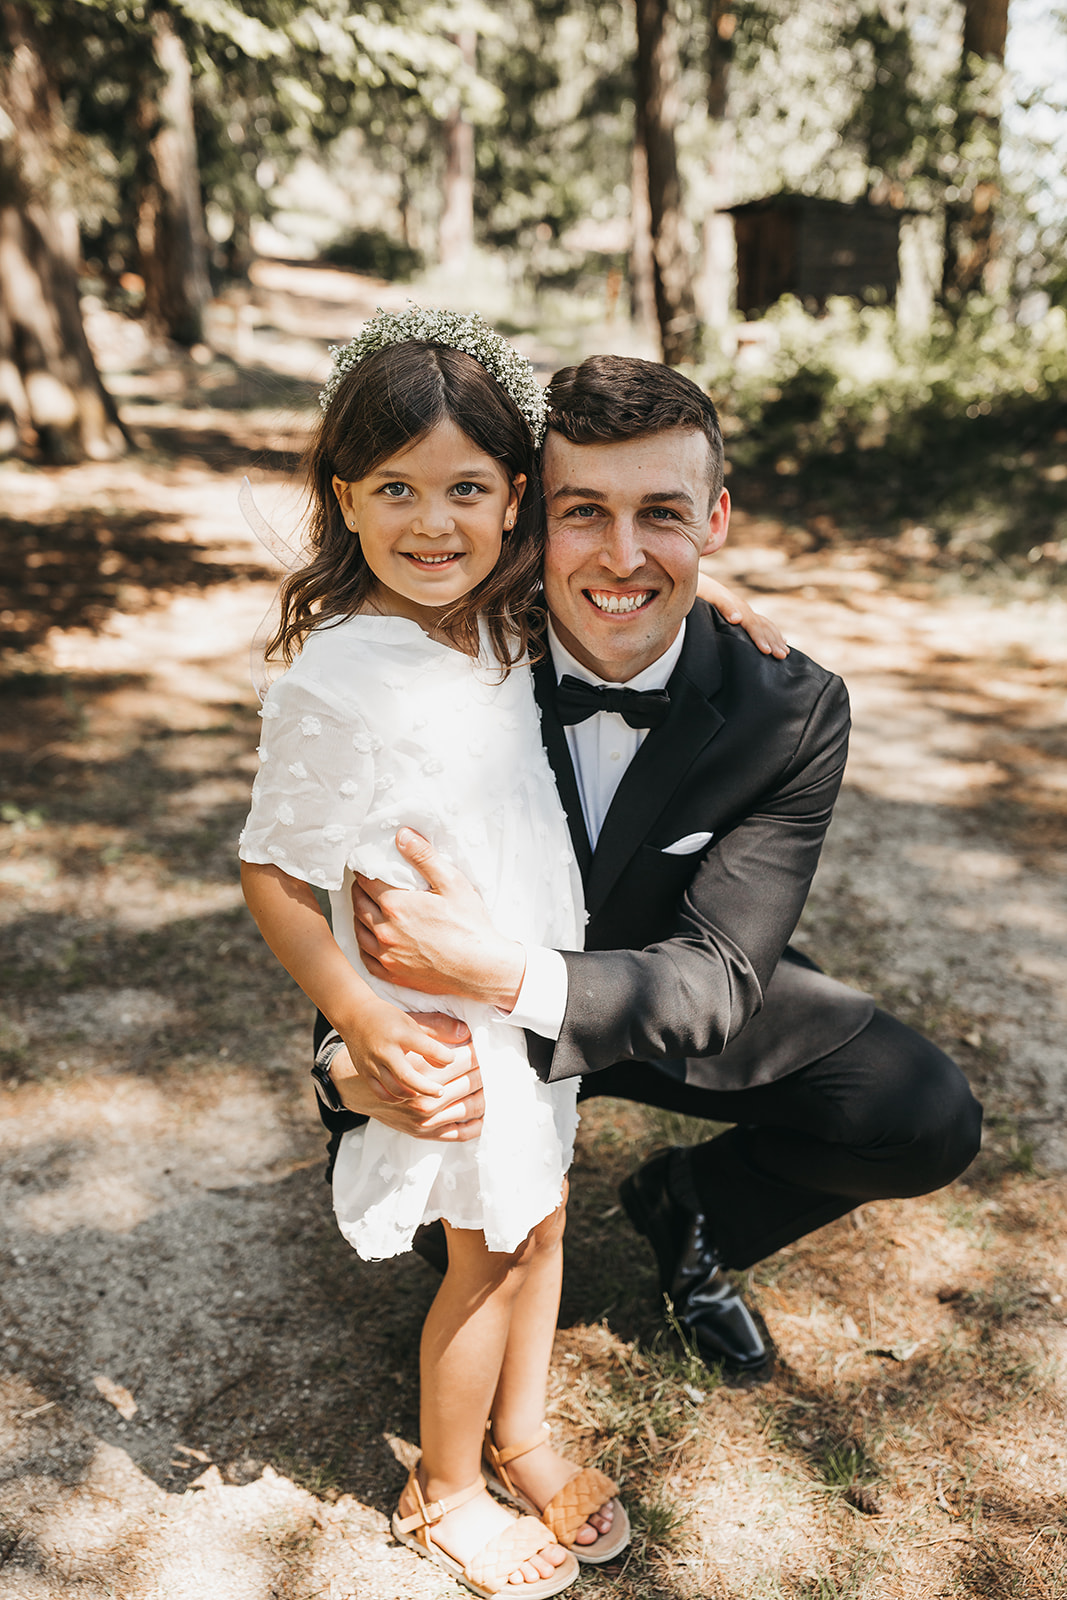 Groom with flower girl at private lake house wedding.